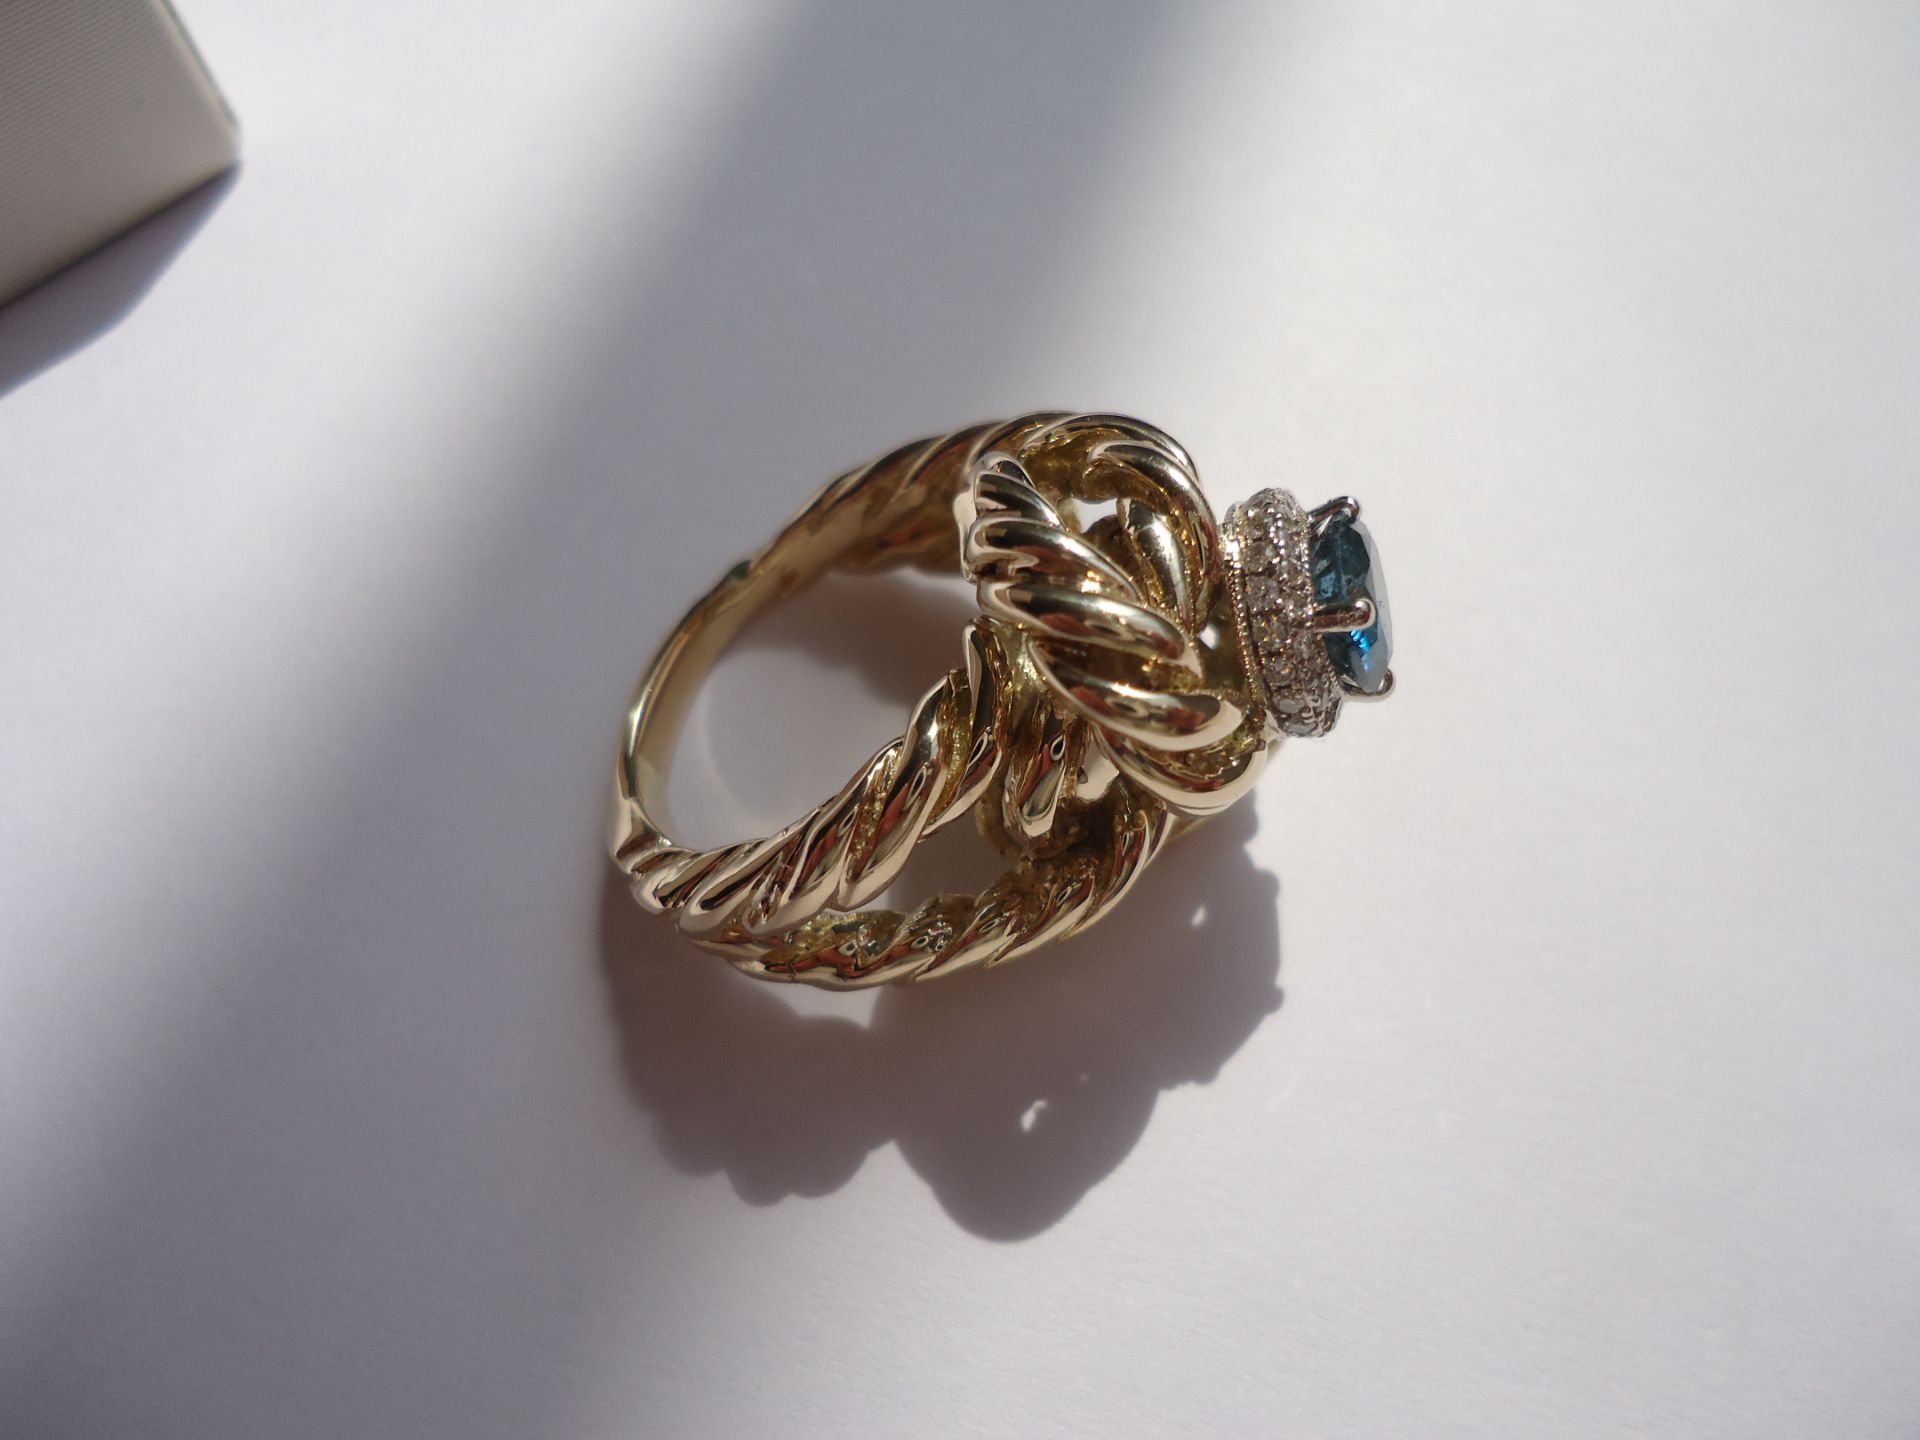 Classic Italian Knot Ring - Image 8 of 15